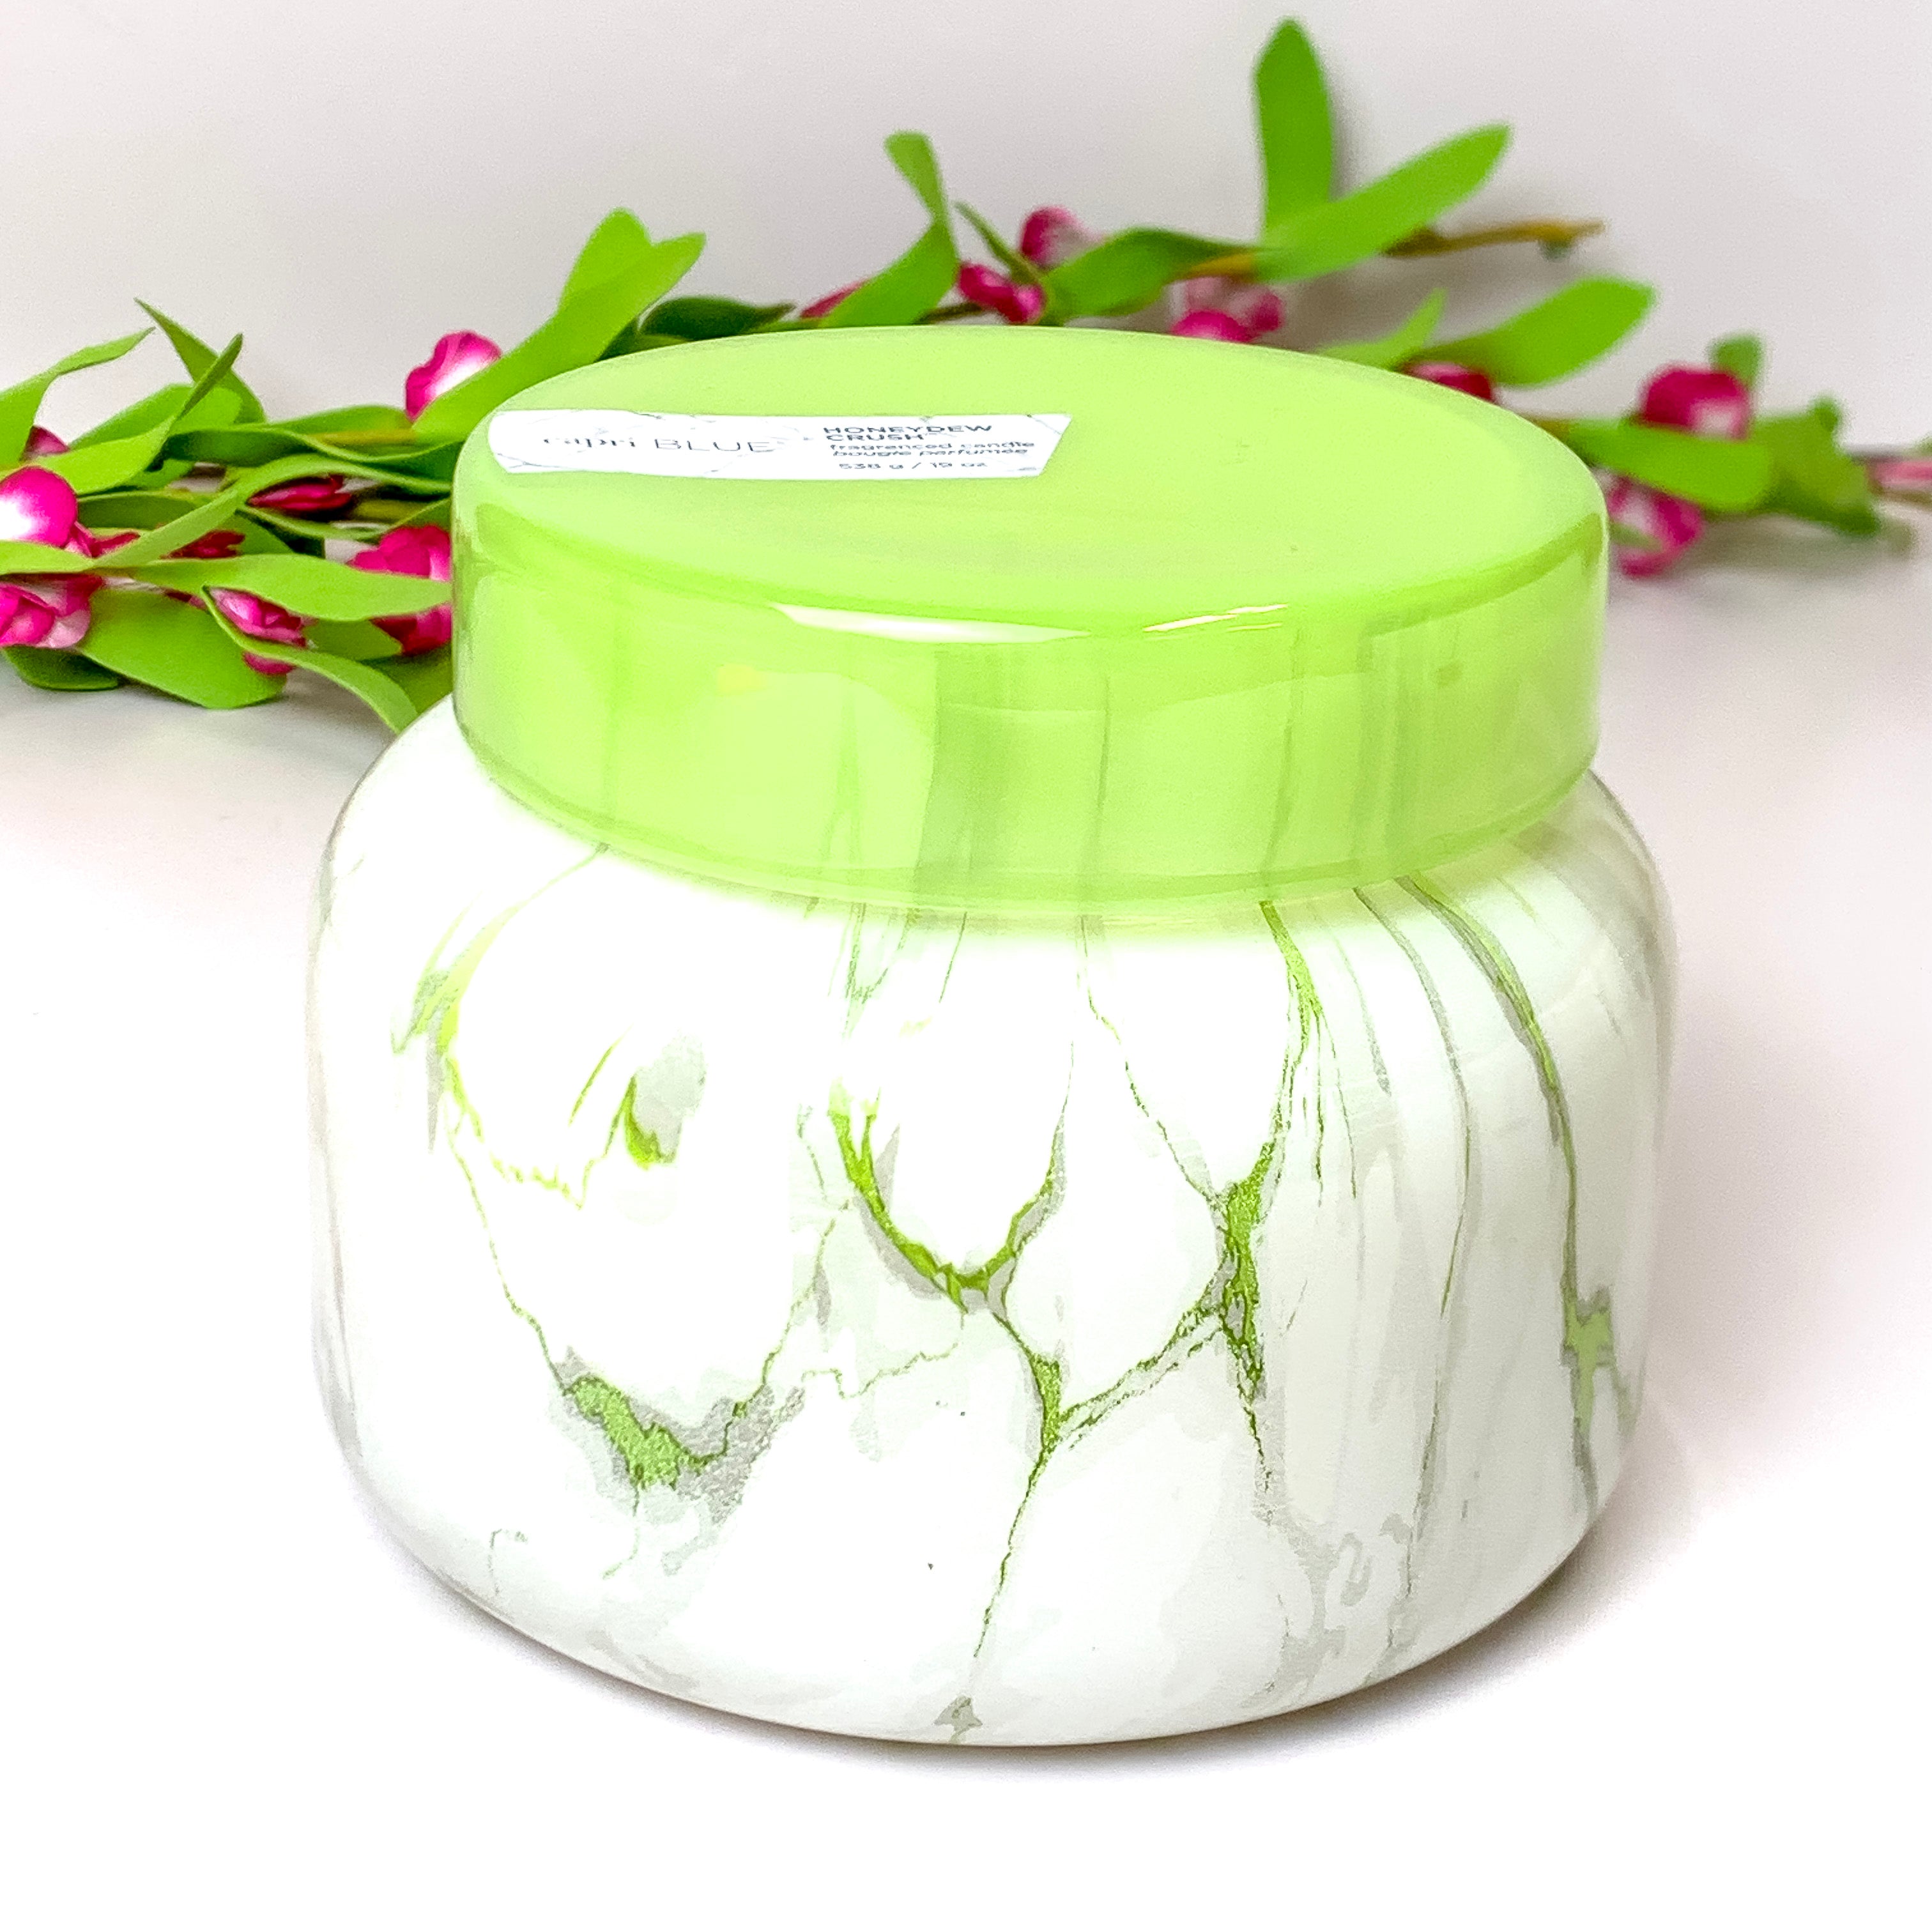 Capri Blue | 19 oz. Marble Jar Candle in Limelight | Honeydew Crush - Giddy Up Glamour Boutique